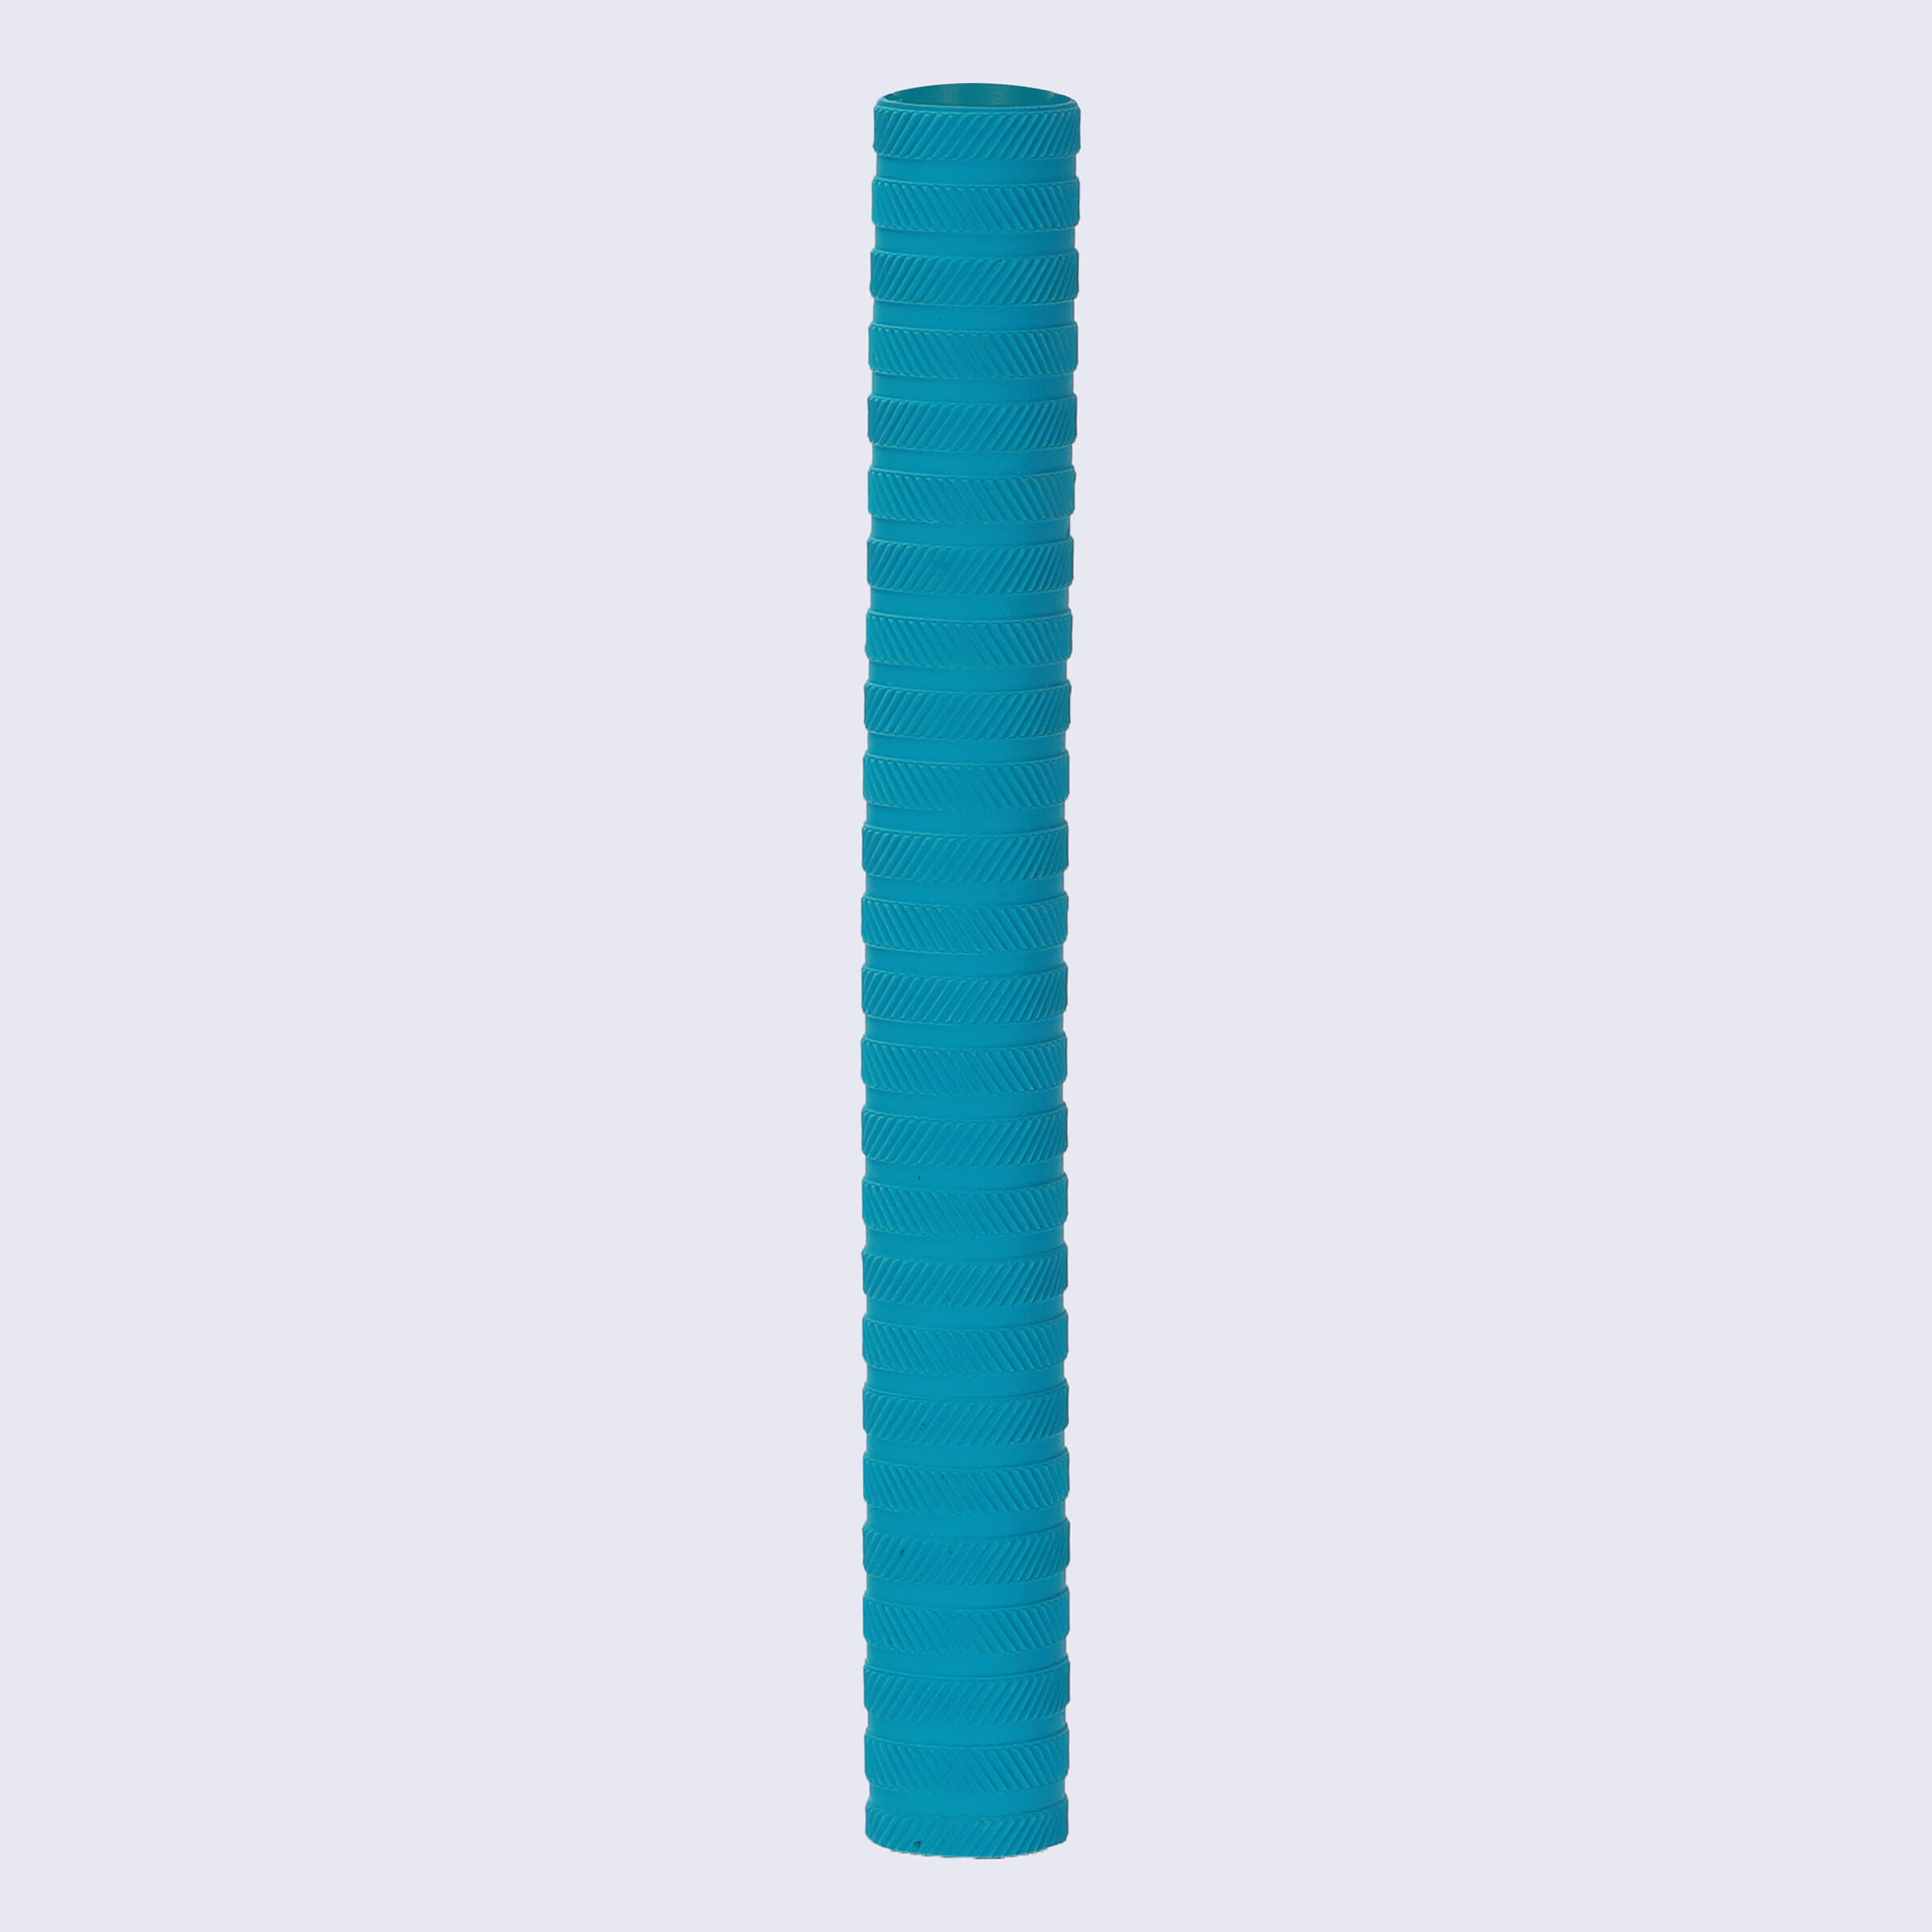 FLX CRICKET BAT RUBBER GRIP- ANNULAR RIBBED PATTERN TURQUOISE